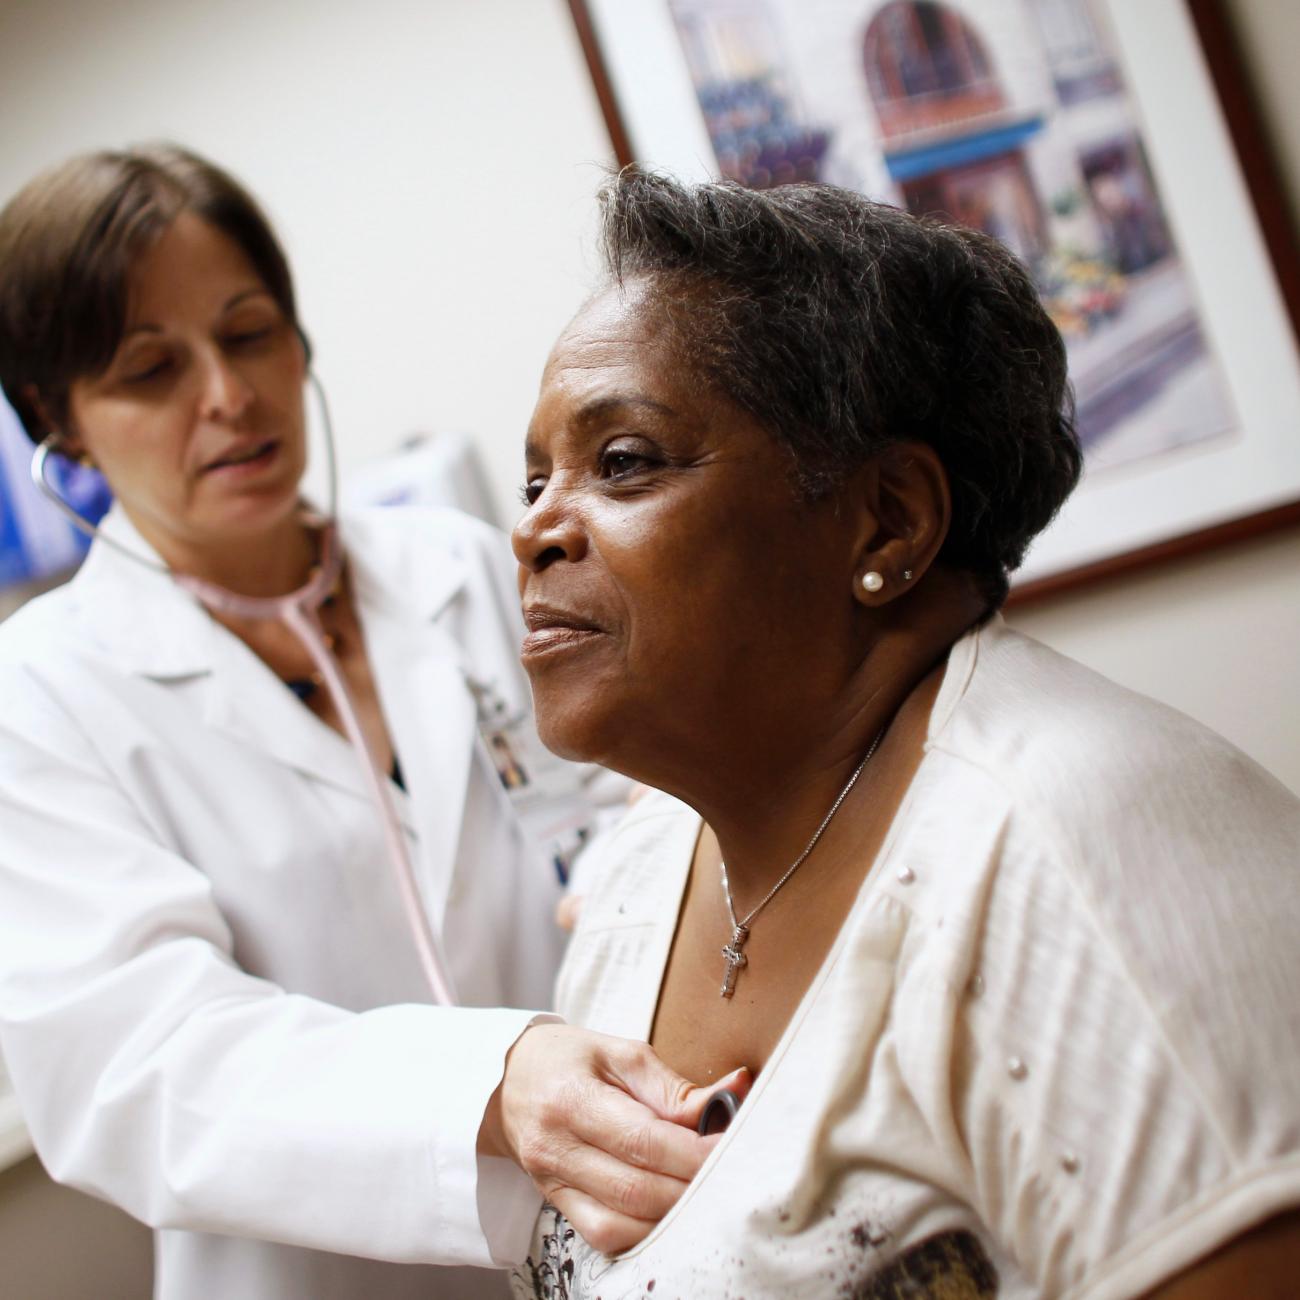 A woman receives a checkup from her primary care physician in Chicago, Illinois, June 28, 2012.